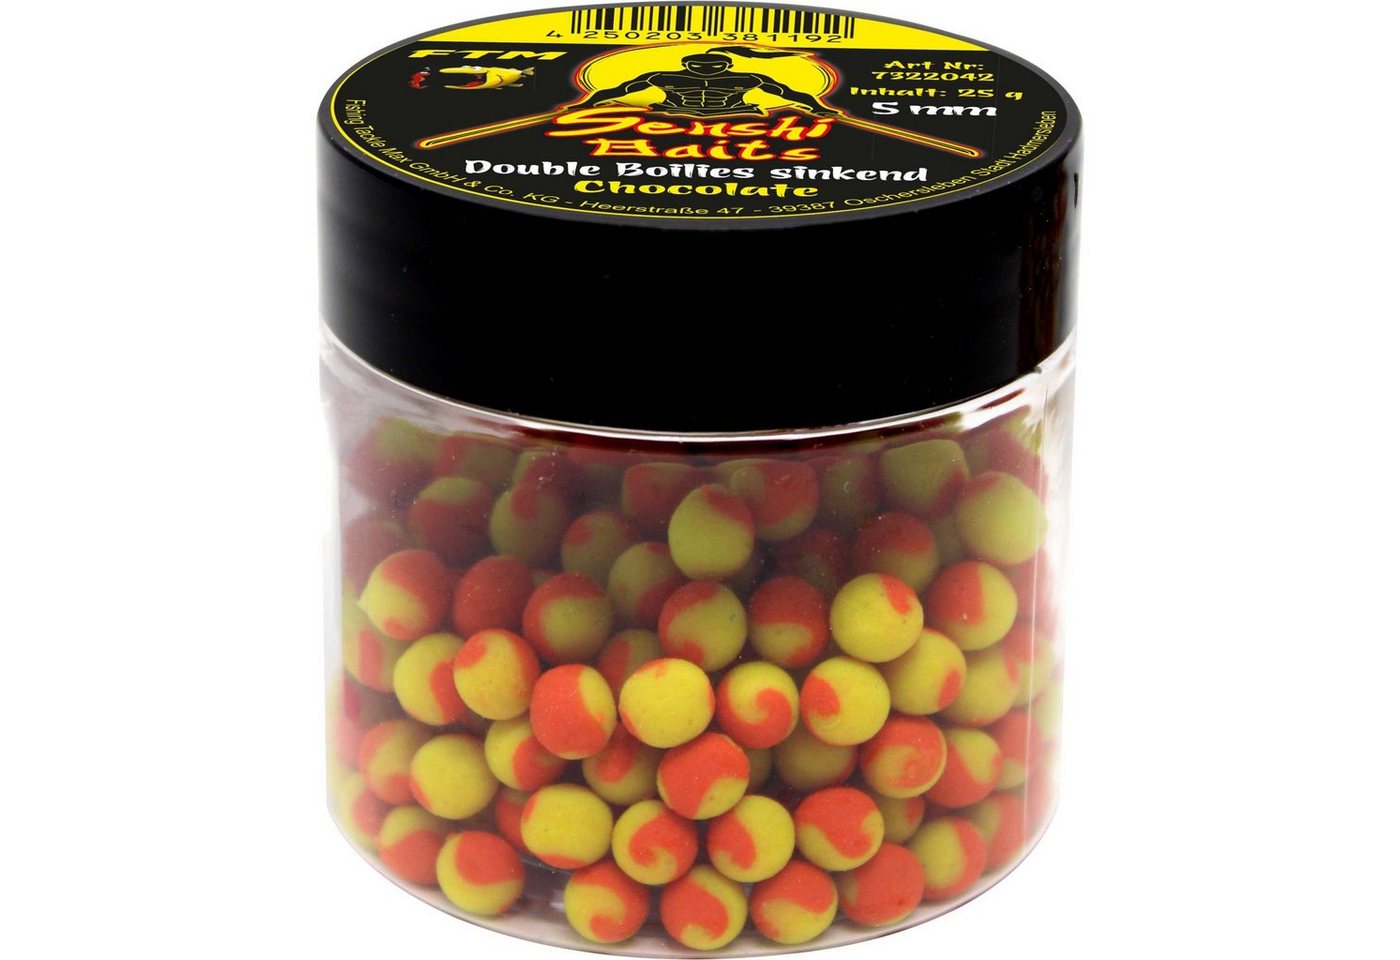 Fishing Tackle Max Fisch-Futterspender FTM Senshi Baits Double Boilies sinkend 5 mm von Fishing Tackle Max